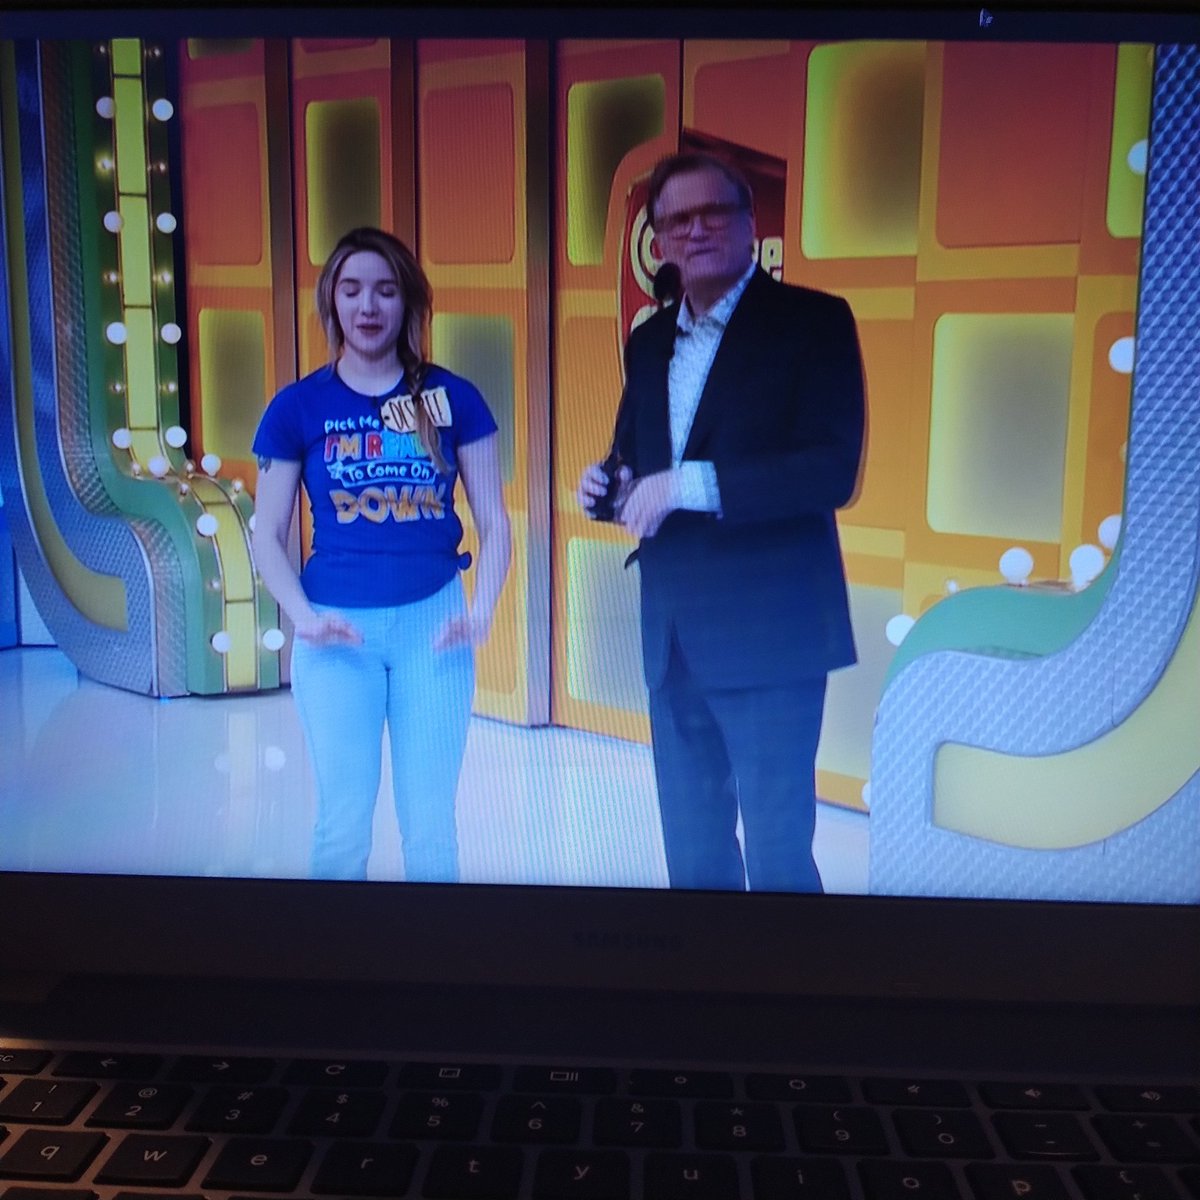 I knew it.
Good guess.
Desiree 1200$
This is life right now.
Playing price is right on my couch.
#DaytimeTV 
Will she win her game?..